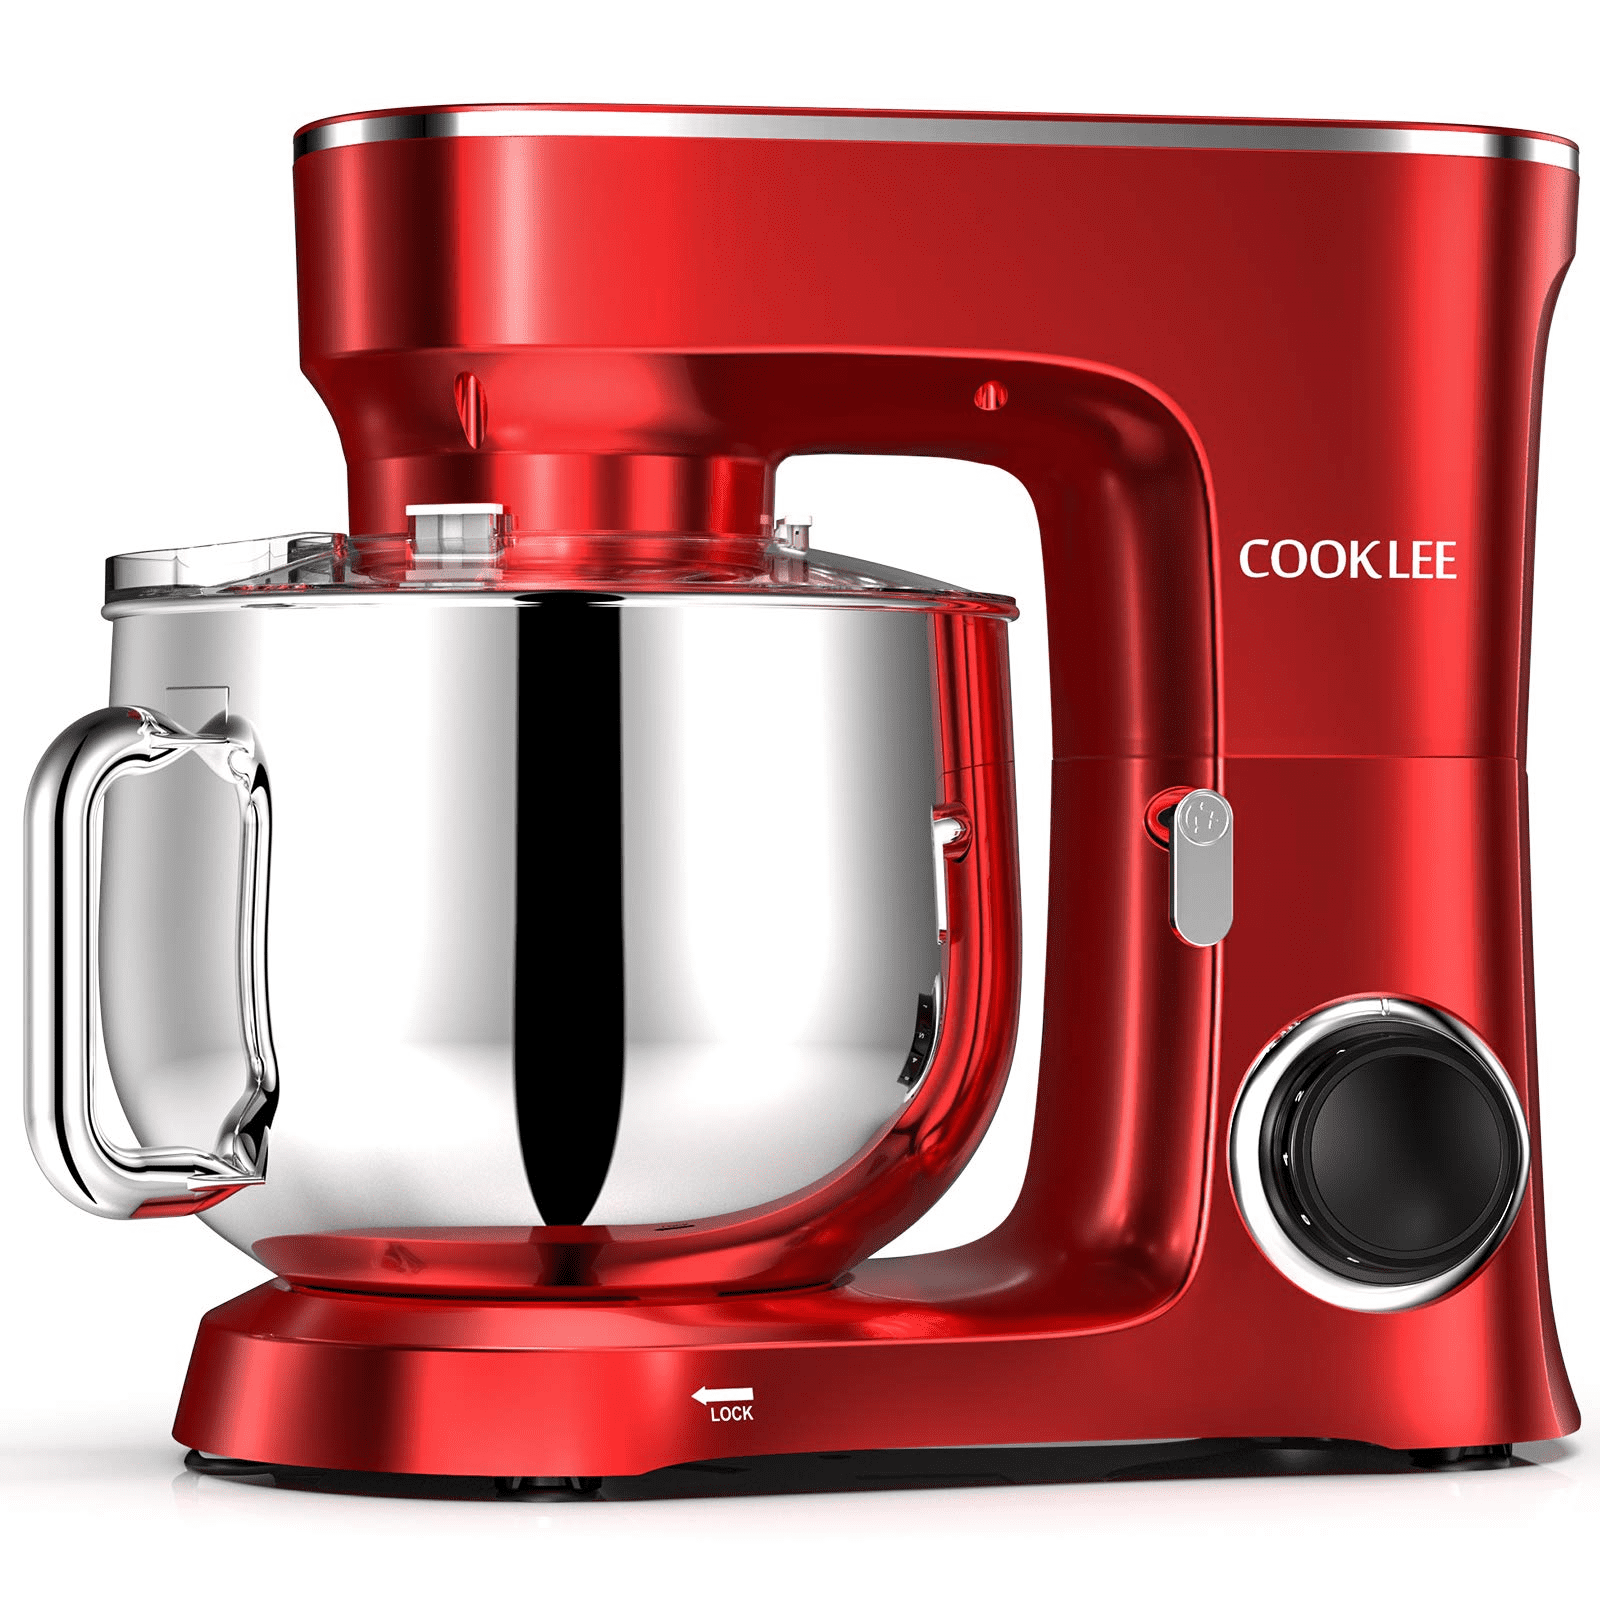 COOKLEE Stand 9.5 Qt. 660W 10-Speed Electric Kitchen Mixer with Dishwasher-Safe Hooks, Flat Beaters, Wire Whip & Pouring Shield for Most Home SM-1551, Ruby Red - Walmart.com